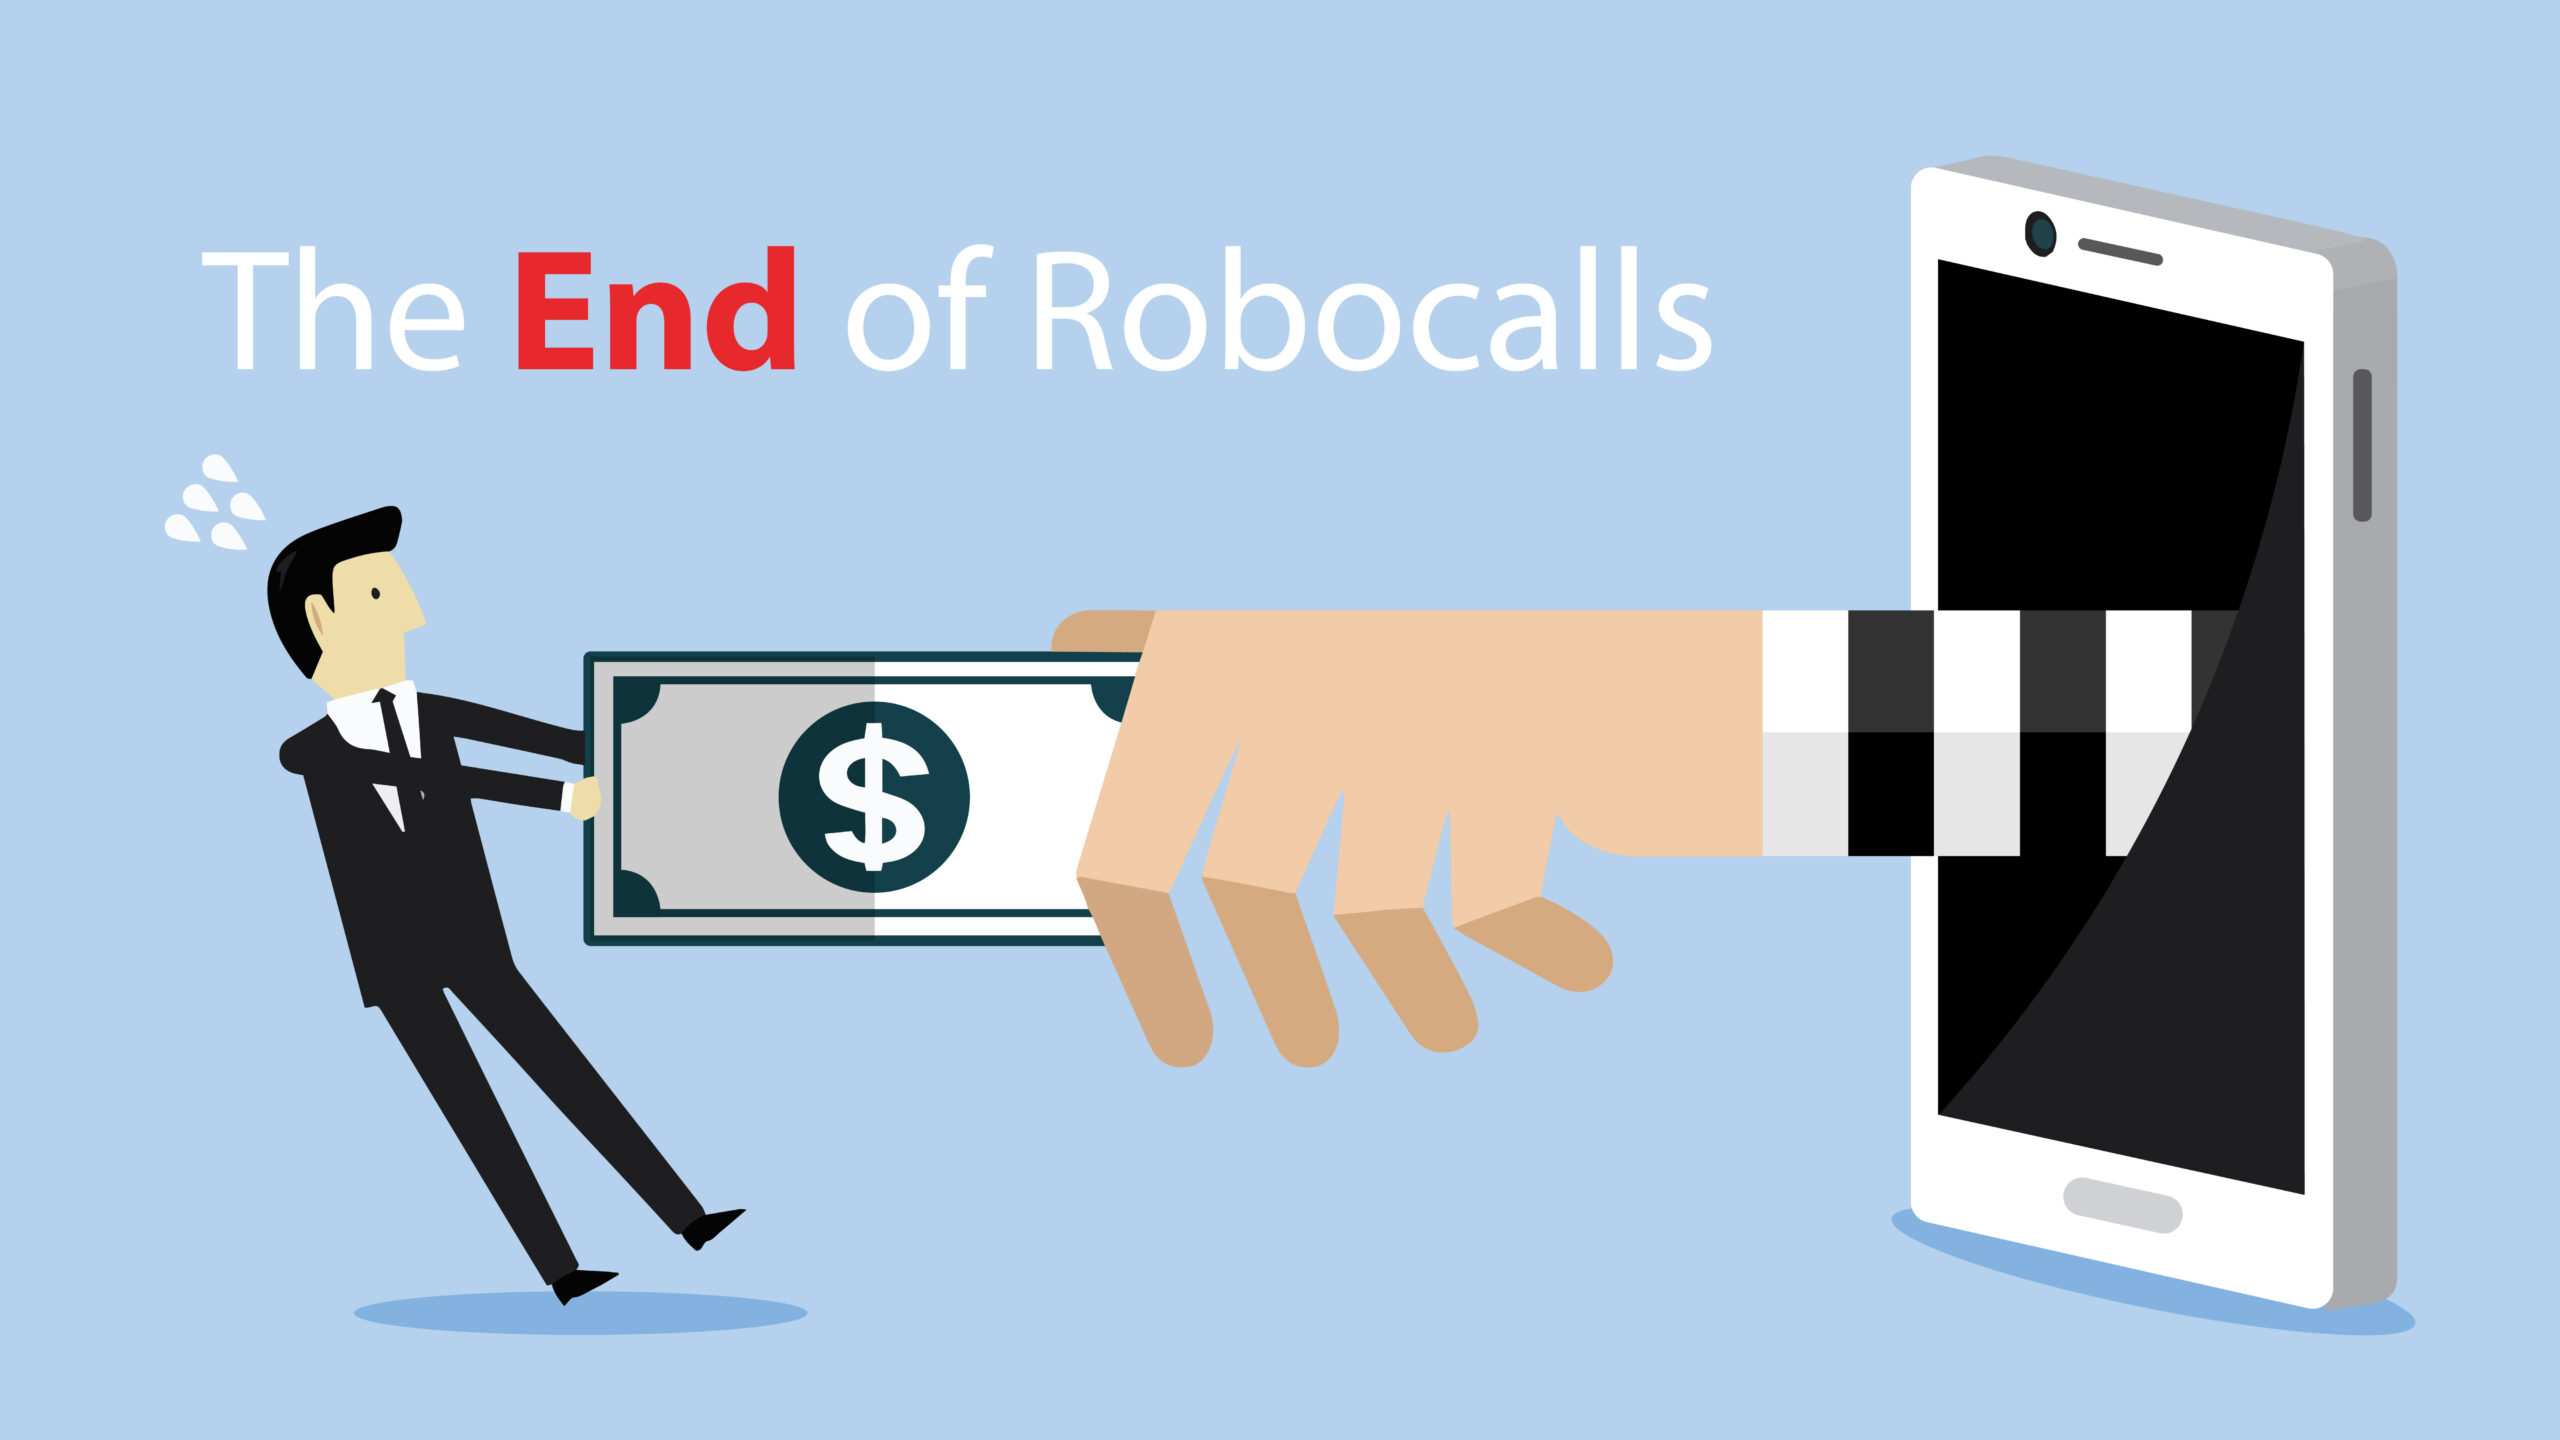 The End of Robocalls